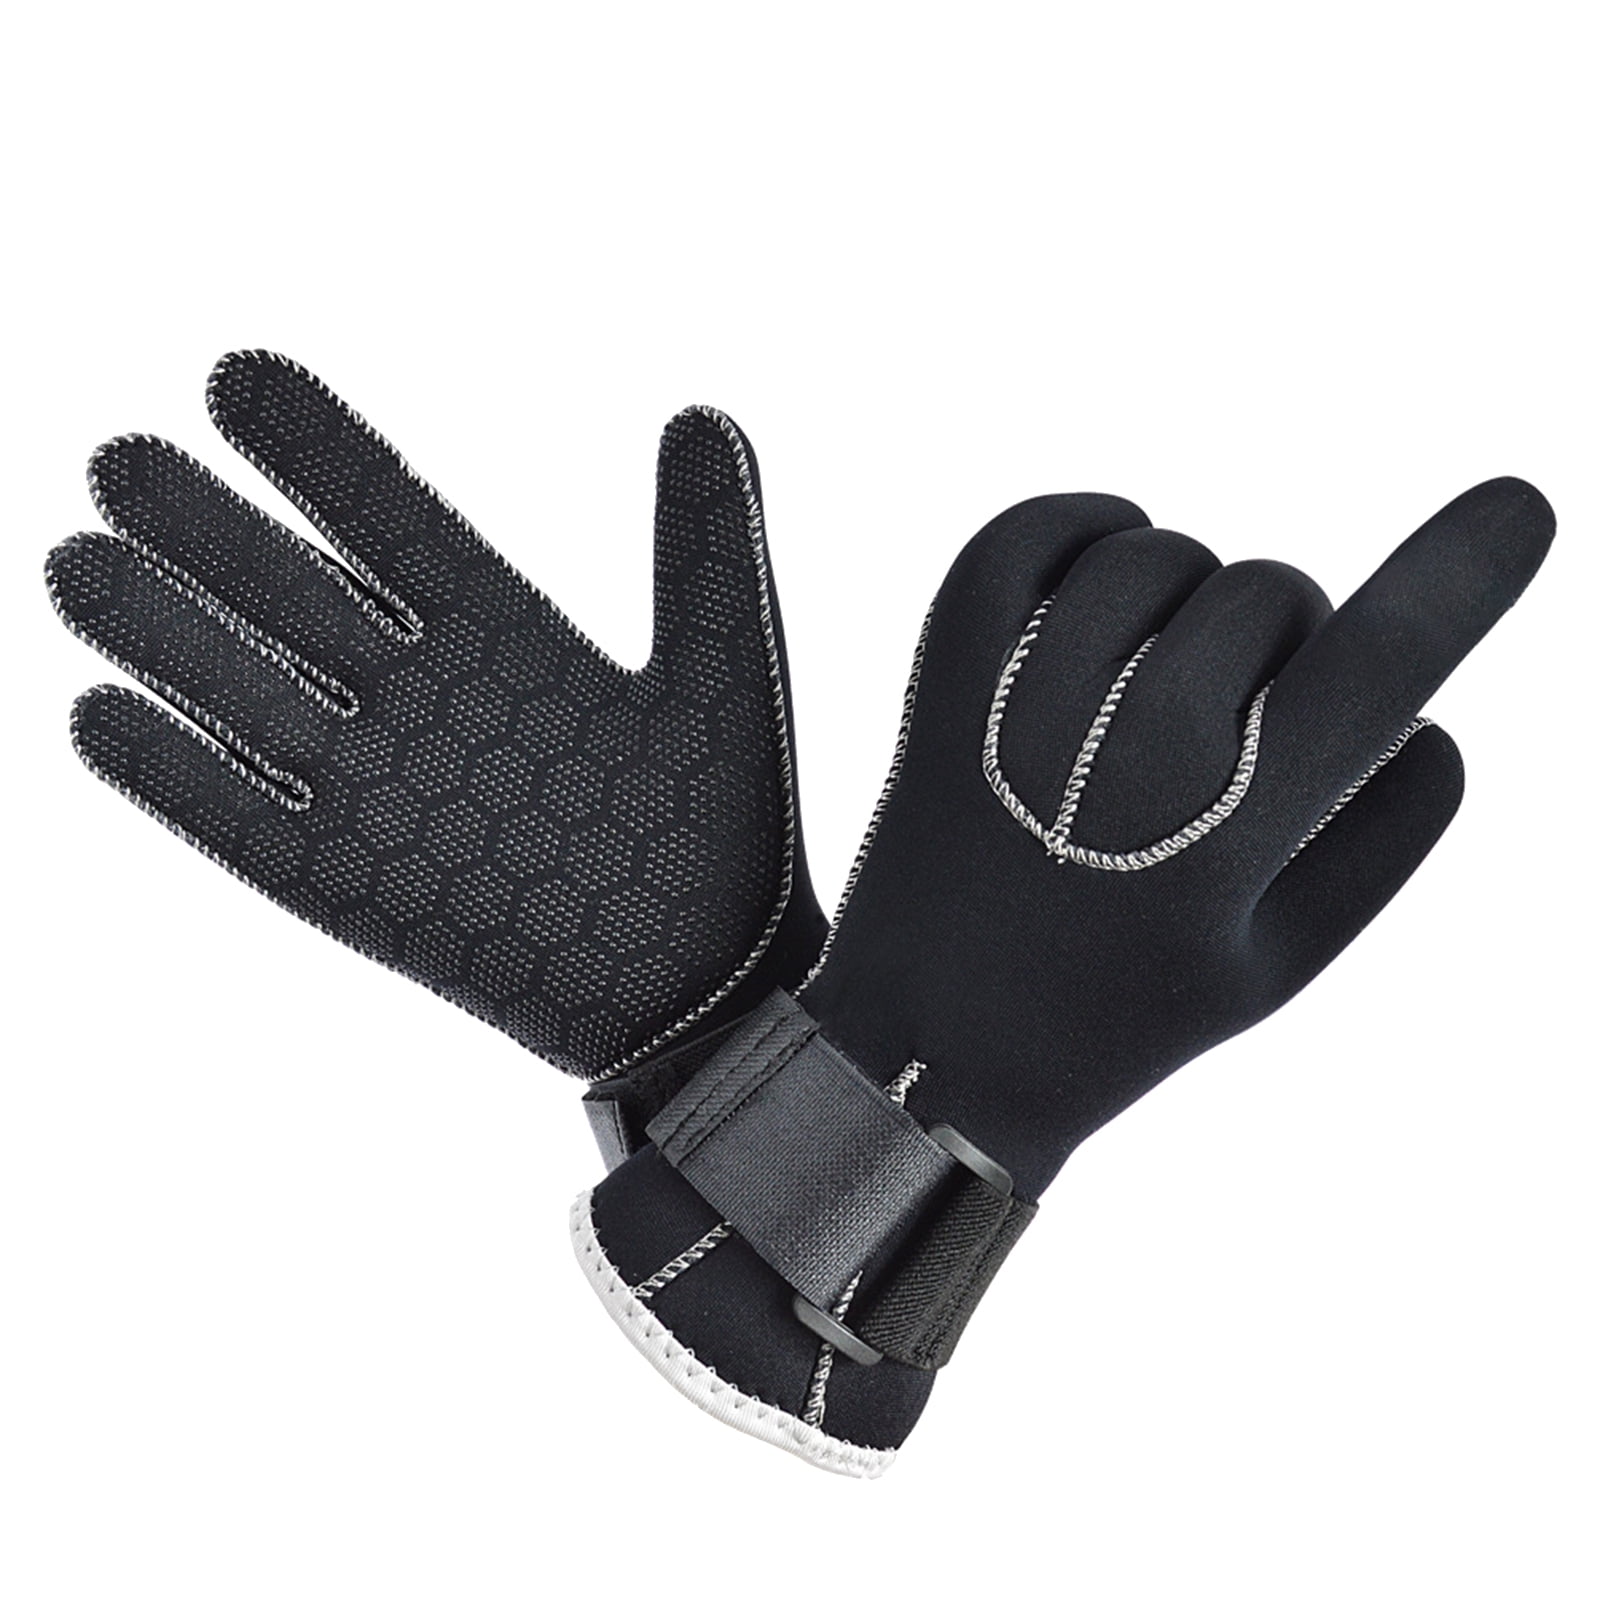 1pair 3mm Surfing Diving Swimming Adjustable Strap Wetsuit Gloves Water Sports 